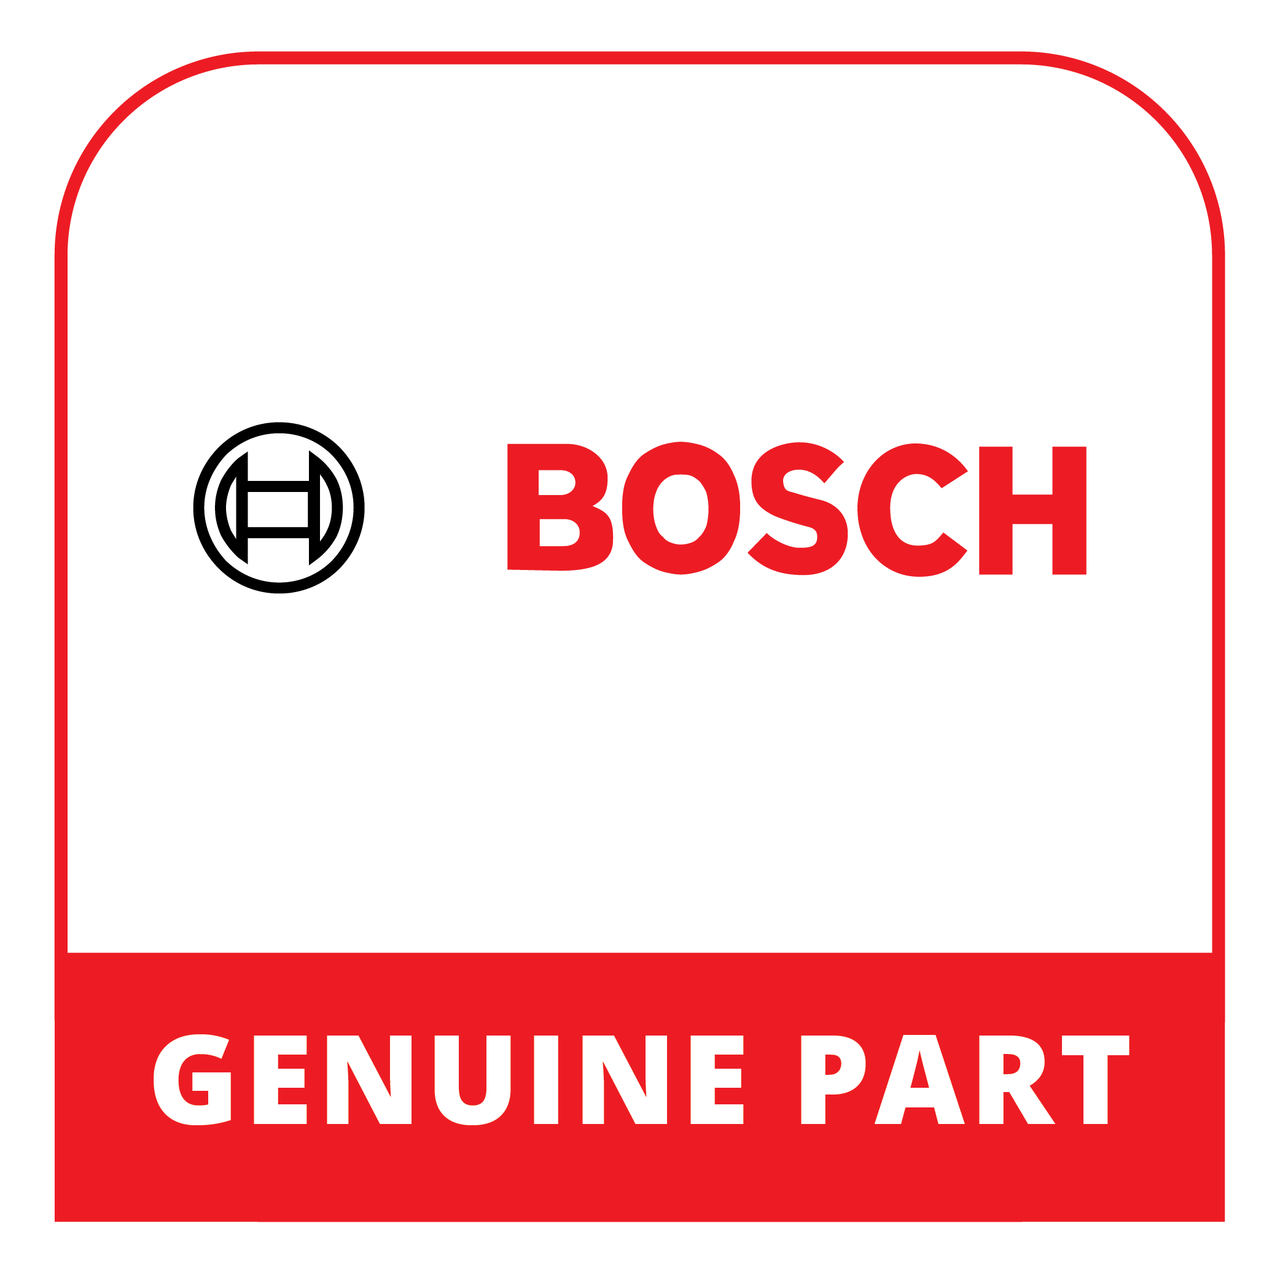 Bosch (Thermador) 18064148 - Installation Instructions - Genuine Bosch (Thermador) Part